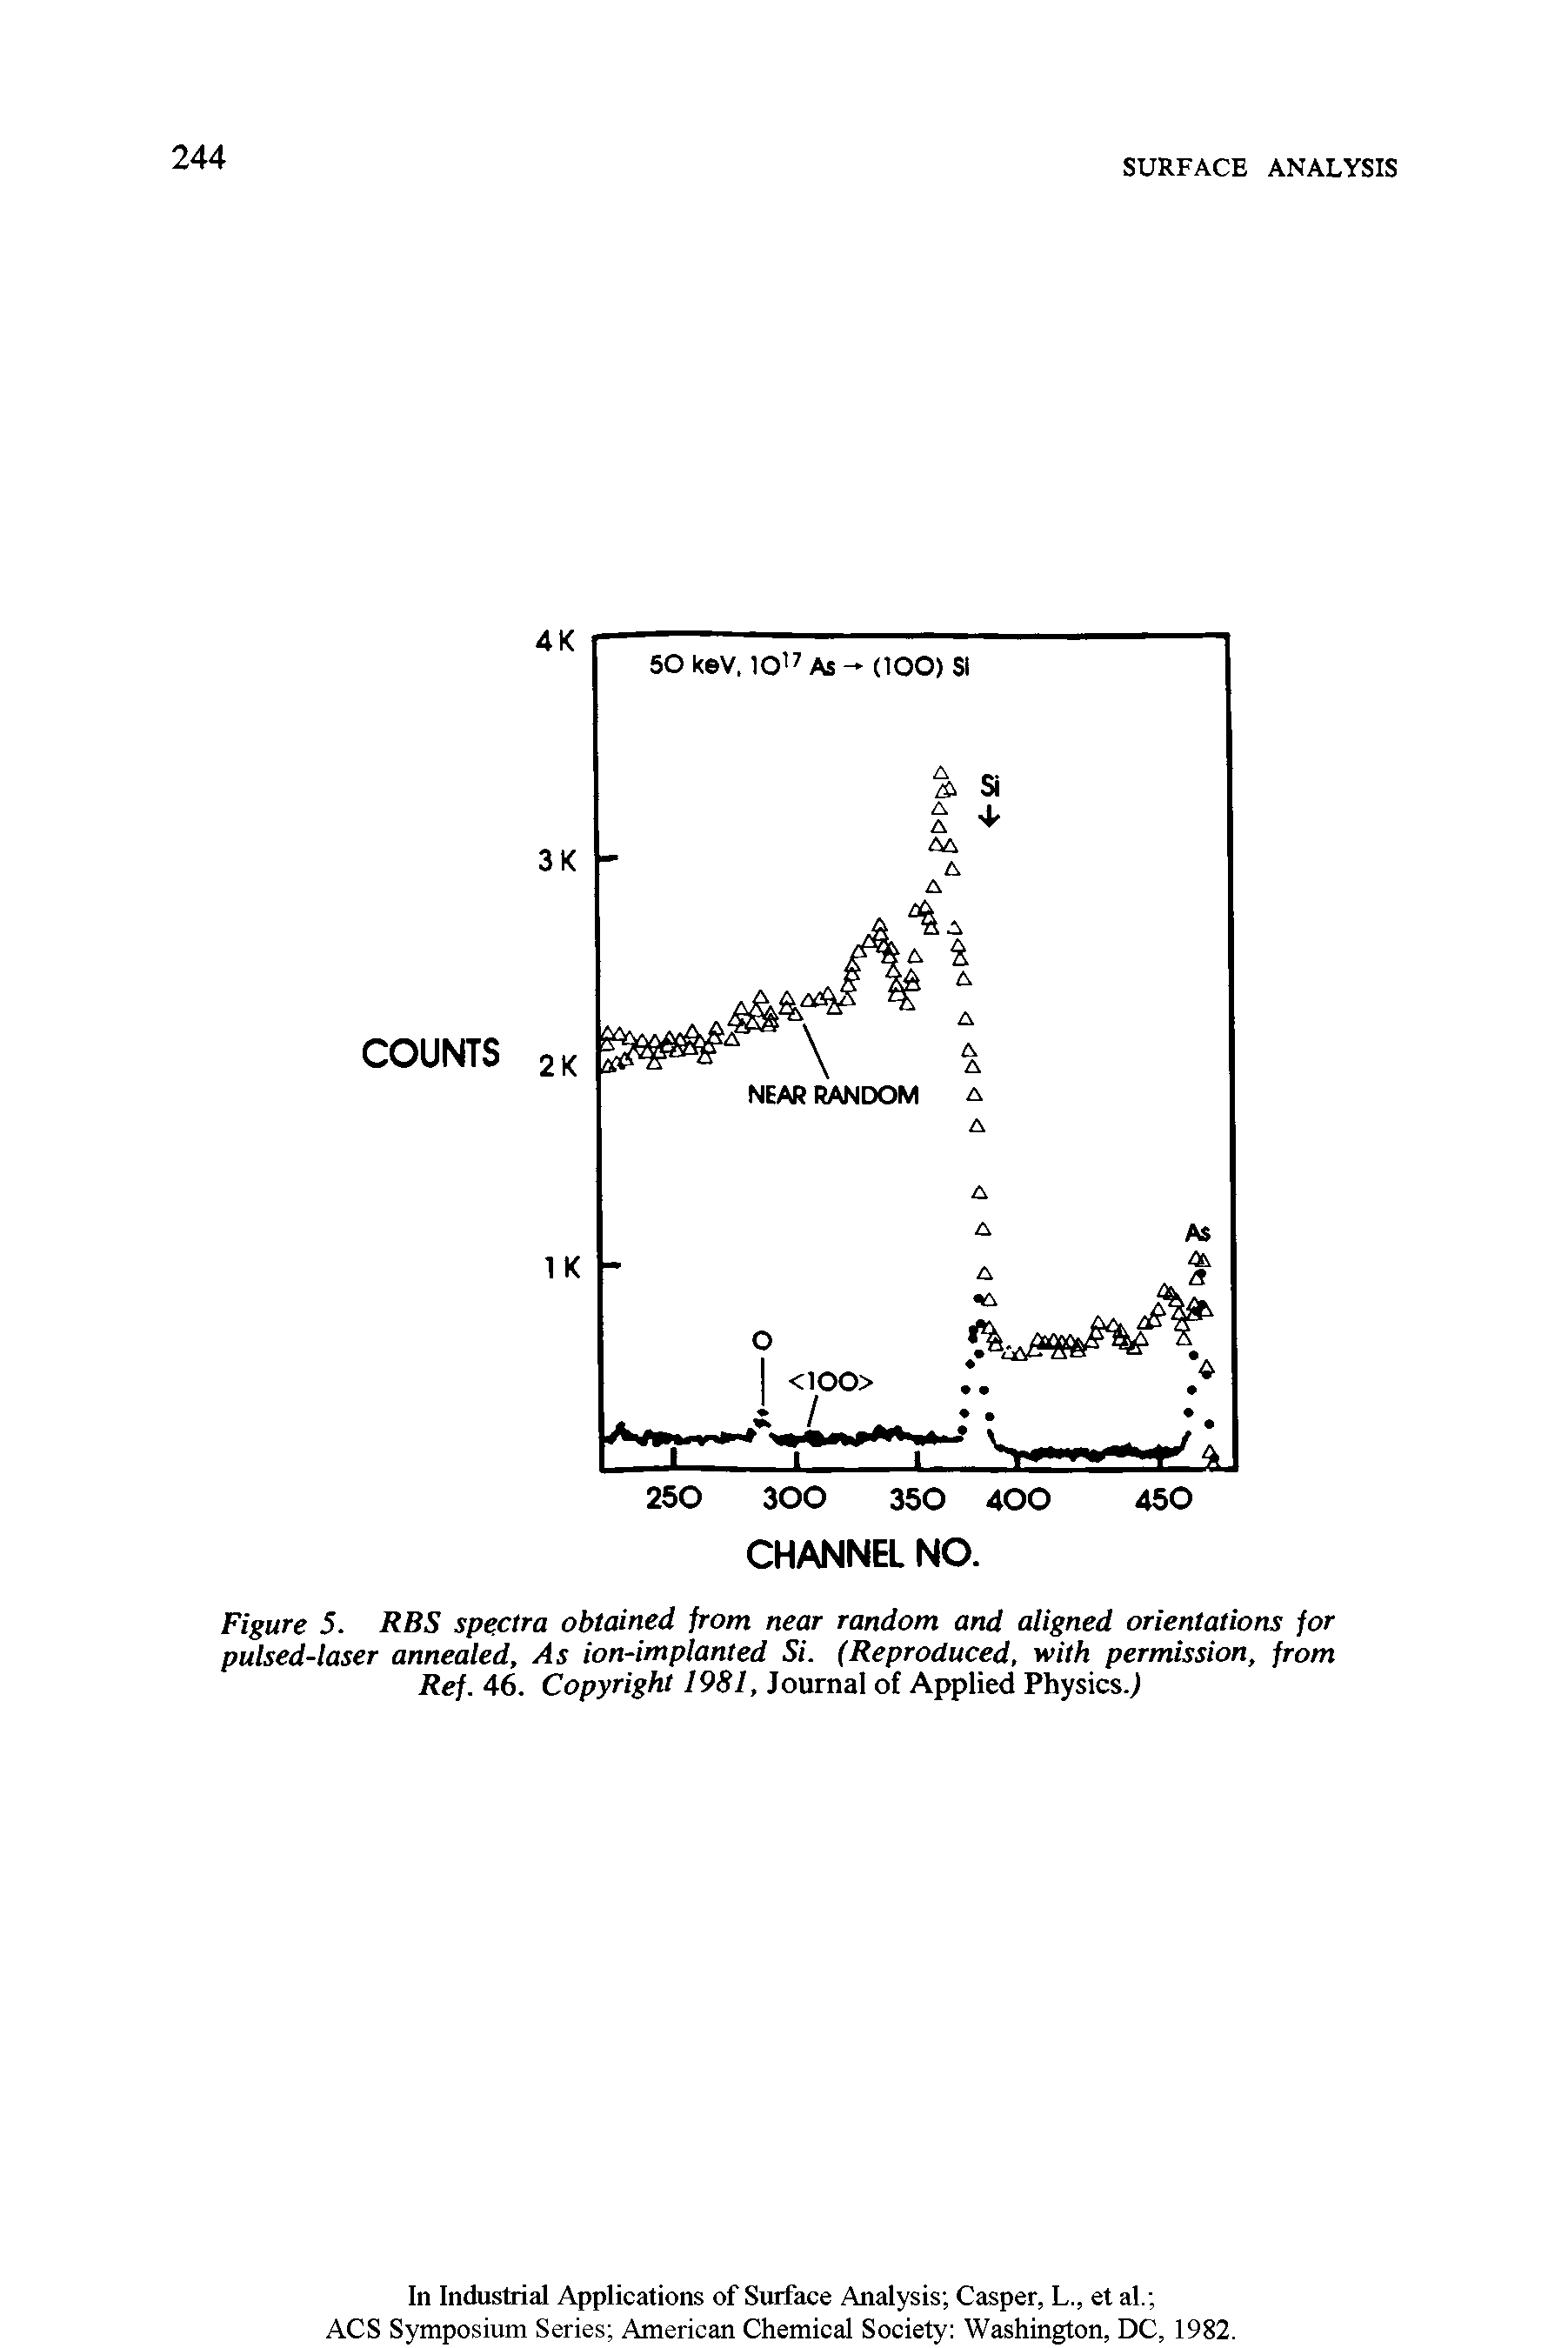 Figure 5. RBS spectra obtained from near random and aligned orientations for pulsed-laser annealed, As ion-implanted Si. (Reproduced, with permission, from Ref. 46. Copyright 1981, Journal of Applied Physics.,)...